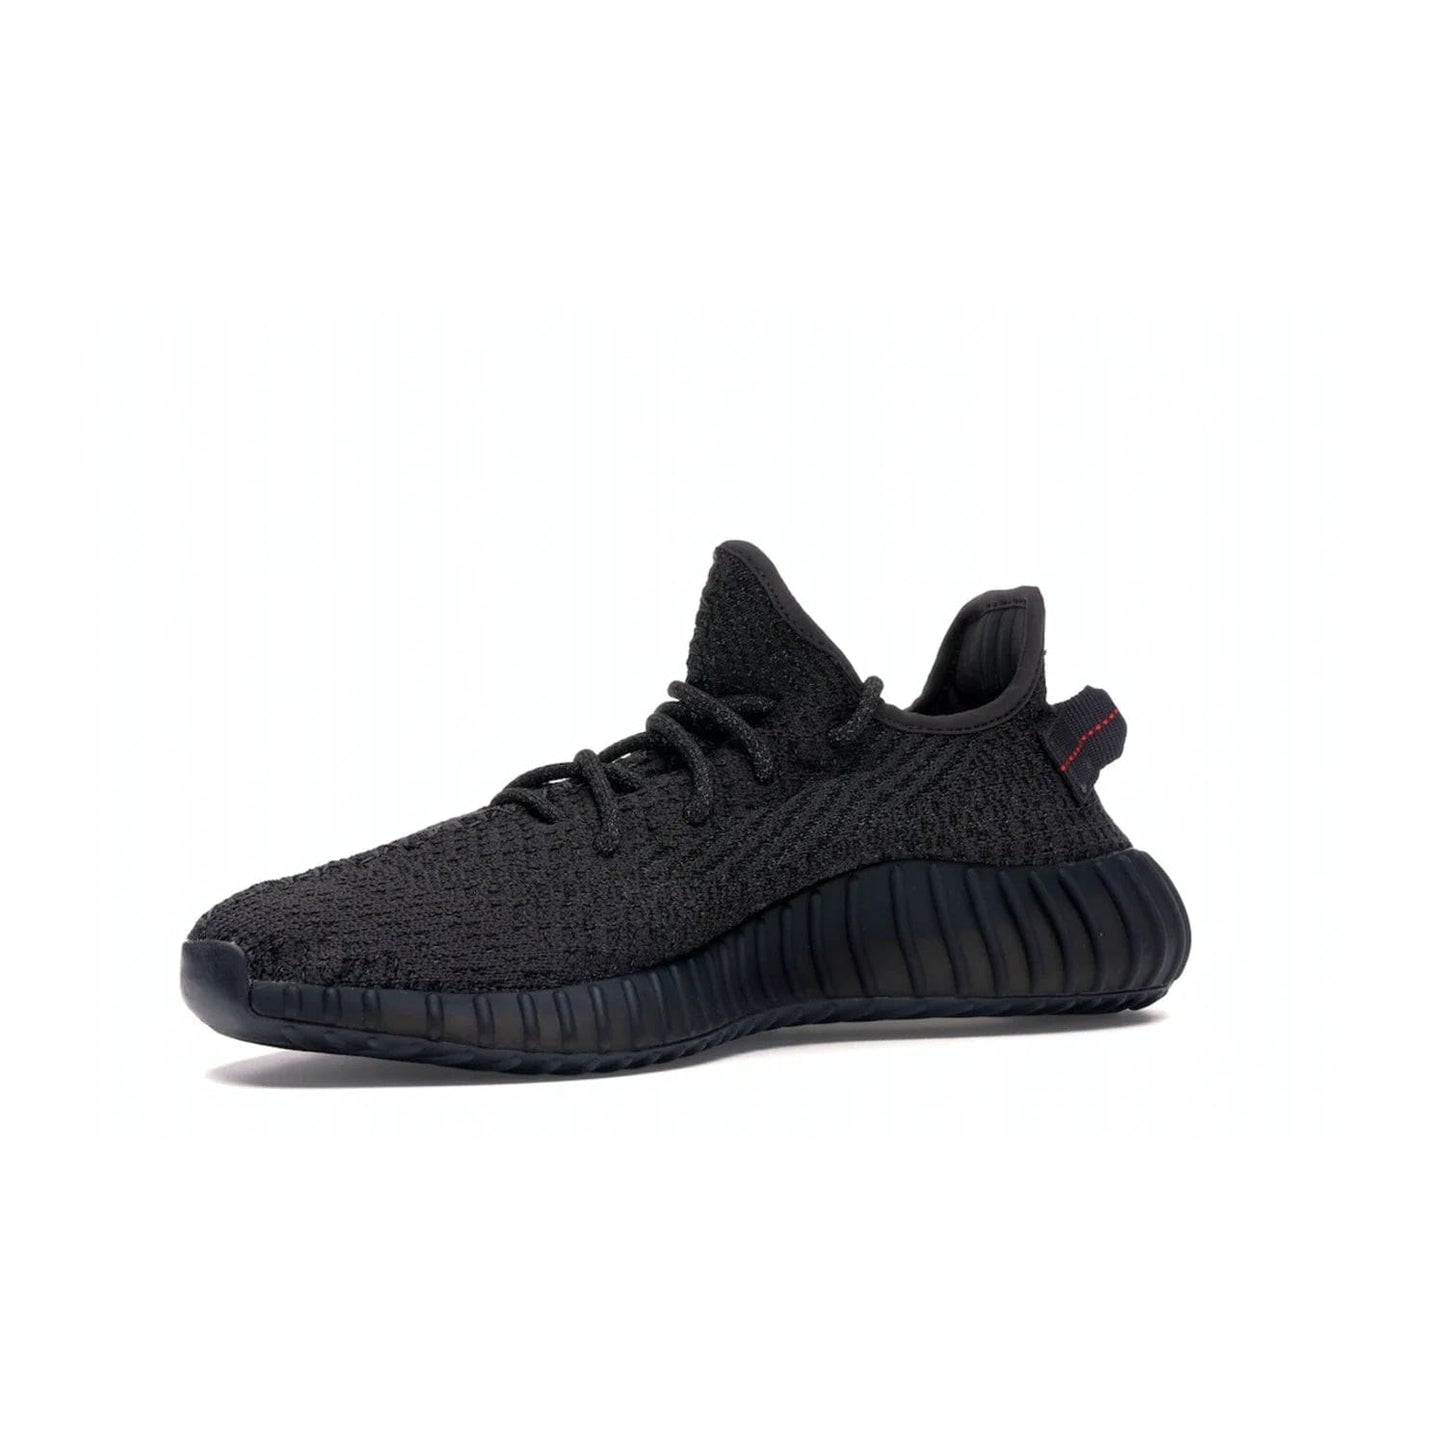 adidas Yeezy Boost 350 V2 Static Black (Reflective) - Image 16 - Only at www.BallersClubKickz.com - Make a statement with the adidas Yeezy Boost 350 V2 Static Black Reflective. All-black upper, reflective accents, midsole, and sole combine for a stylish look. High quality materials. June 2019 release. Add to your collection today.